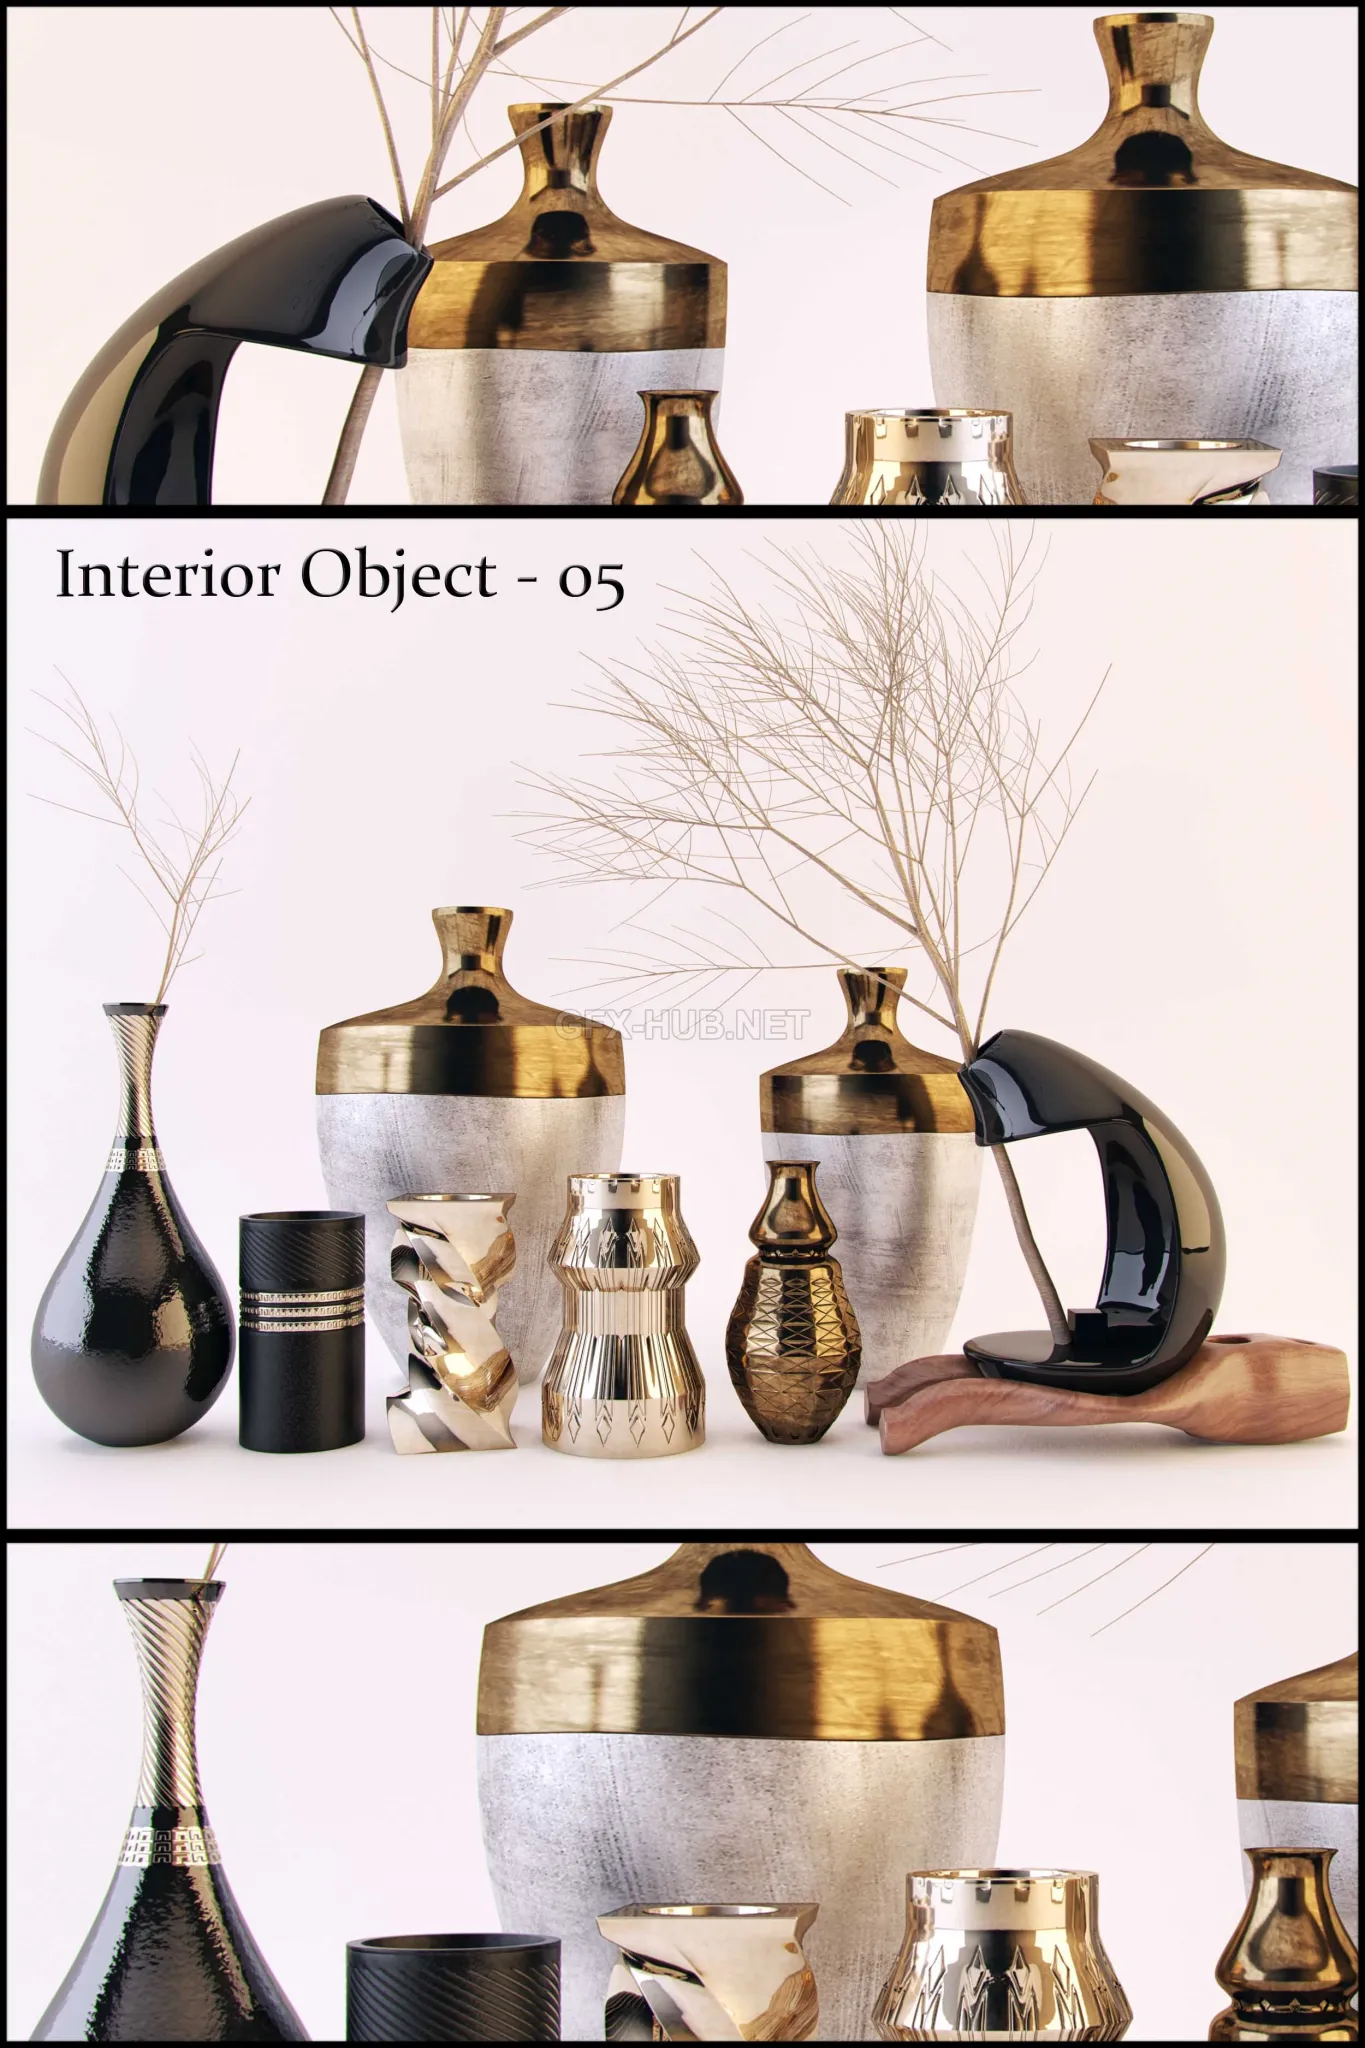 FURNITURE 3D MODELS – Interior Object 05 (8 styles of of modern vases)